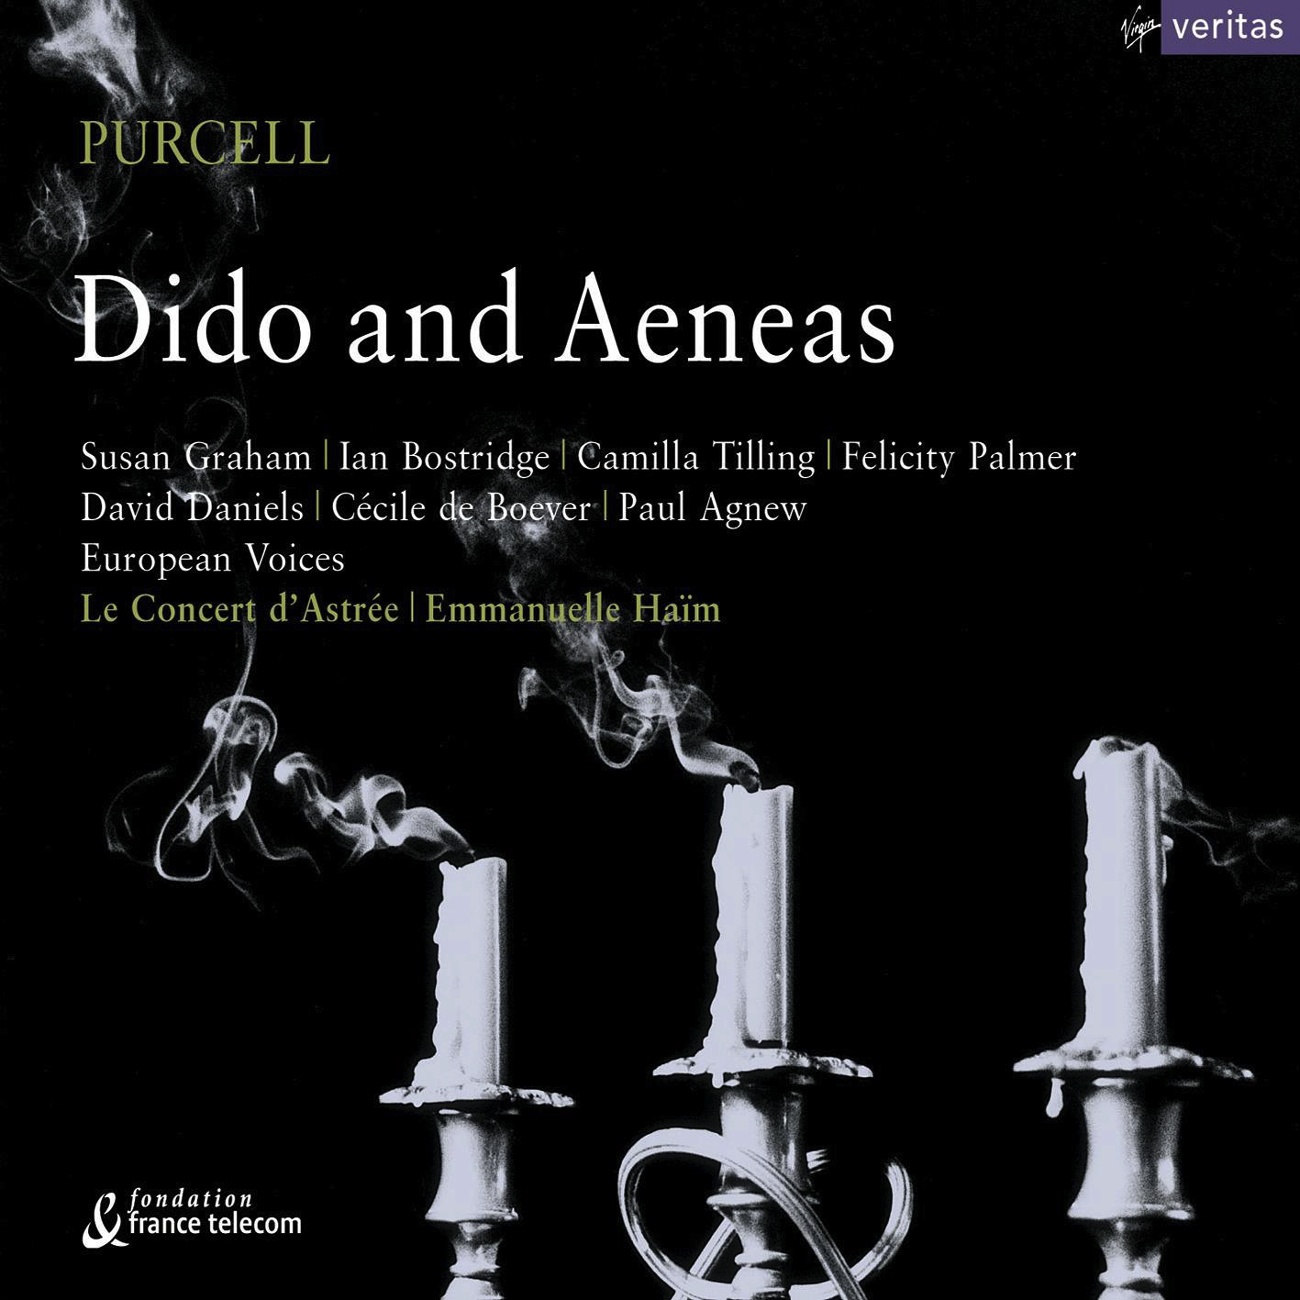 Dido and Aeneas, ACT 1: Scene: The Palast: Fear no danger to ensue (Belinda-Second Woman-Chorus)